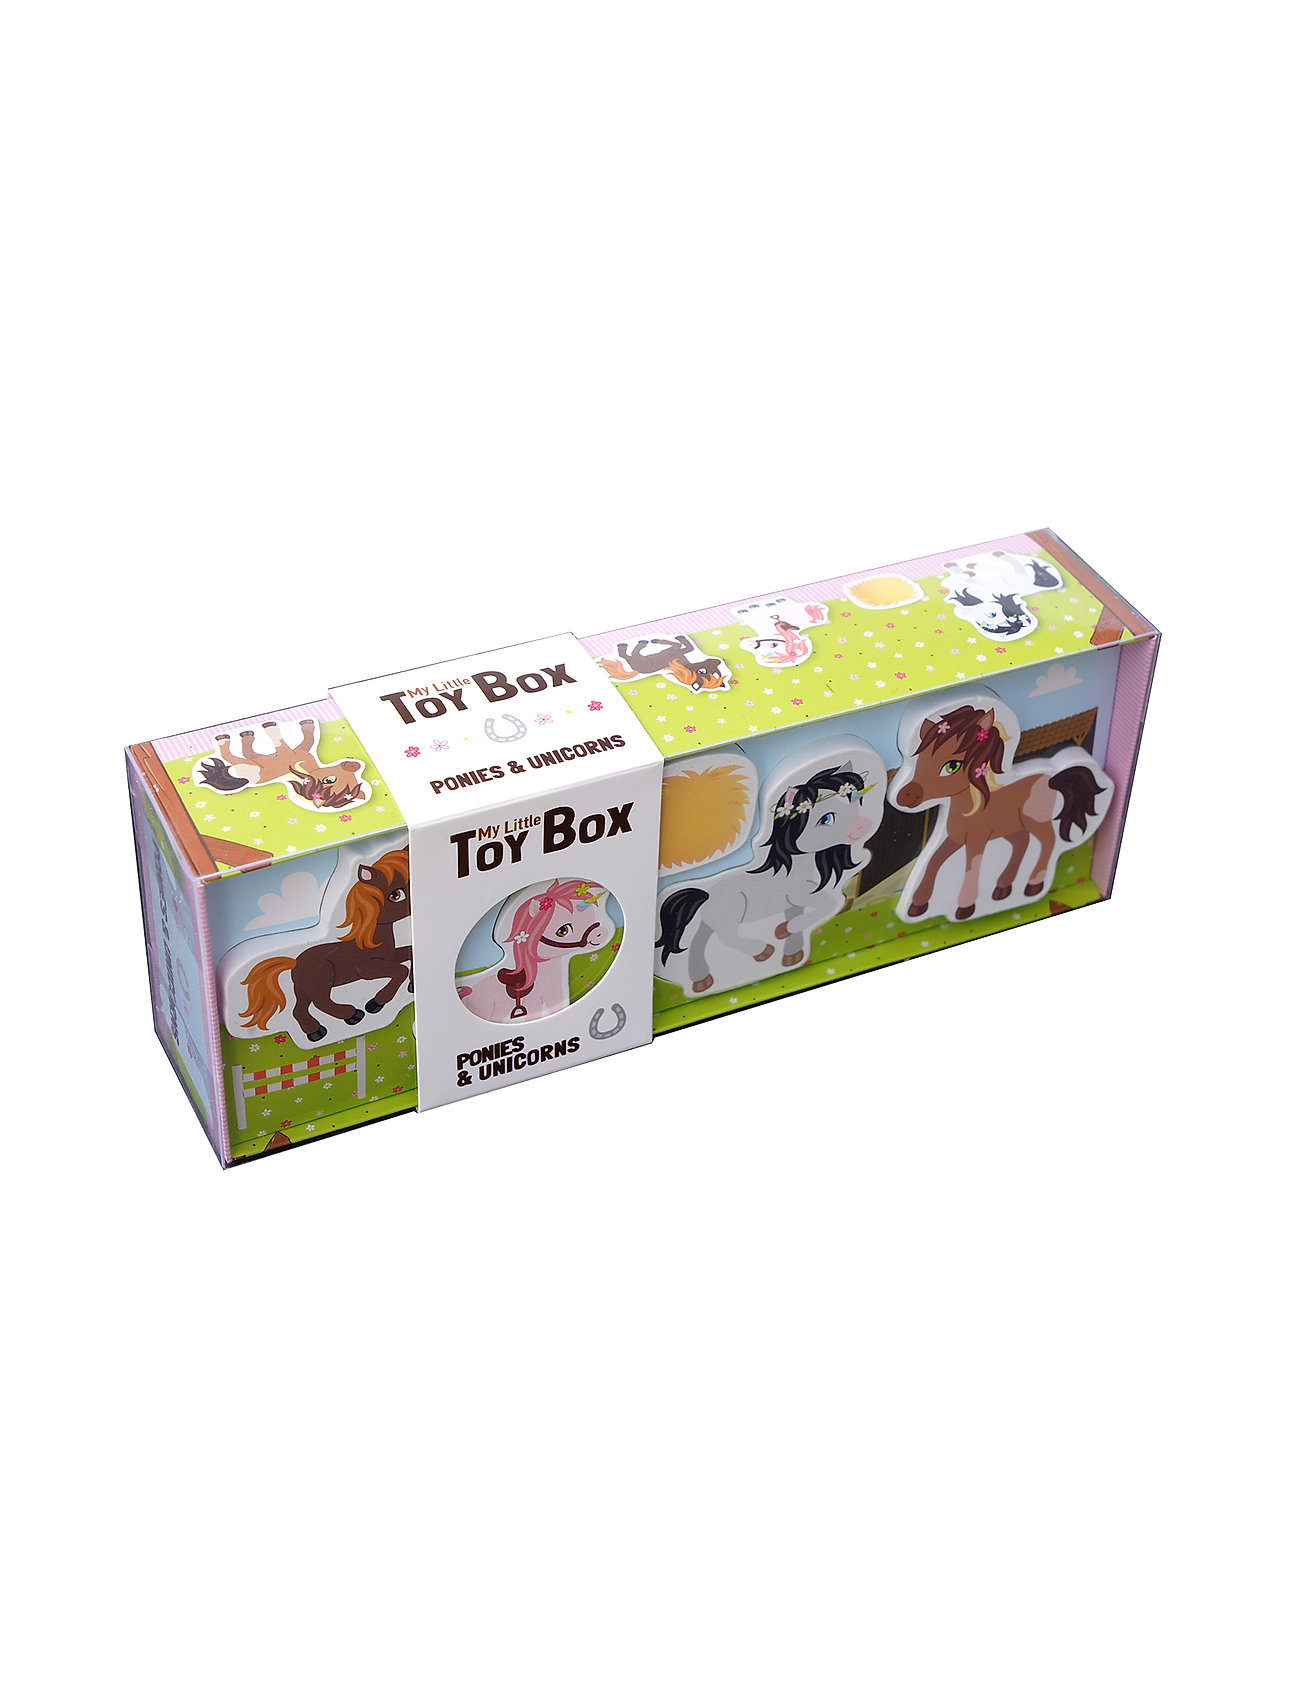 My Little Toy Box - Horses And Ponies Toys Playsets & Action Figures Wooden Figures Multi/patterned Barbo Toys